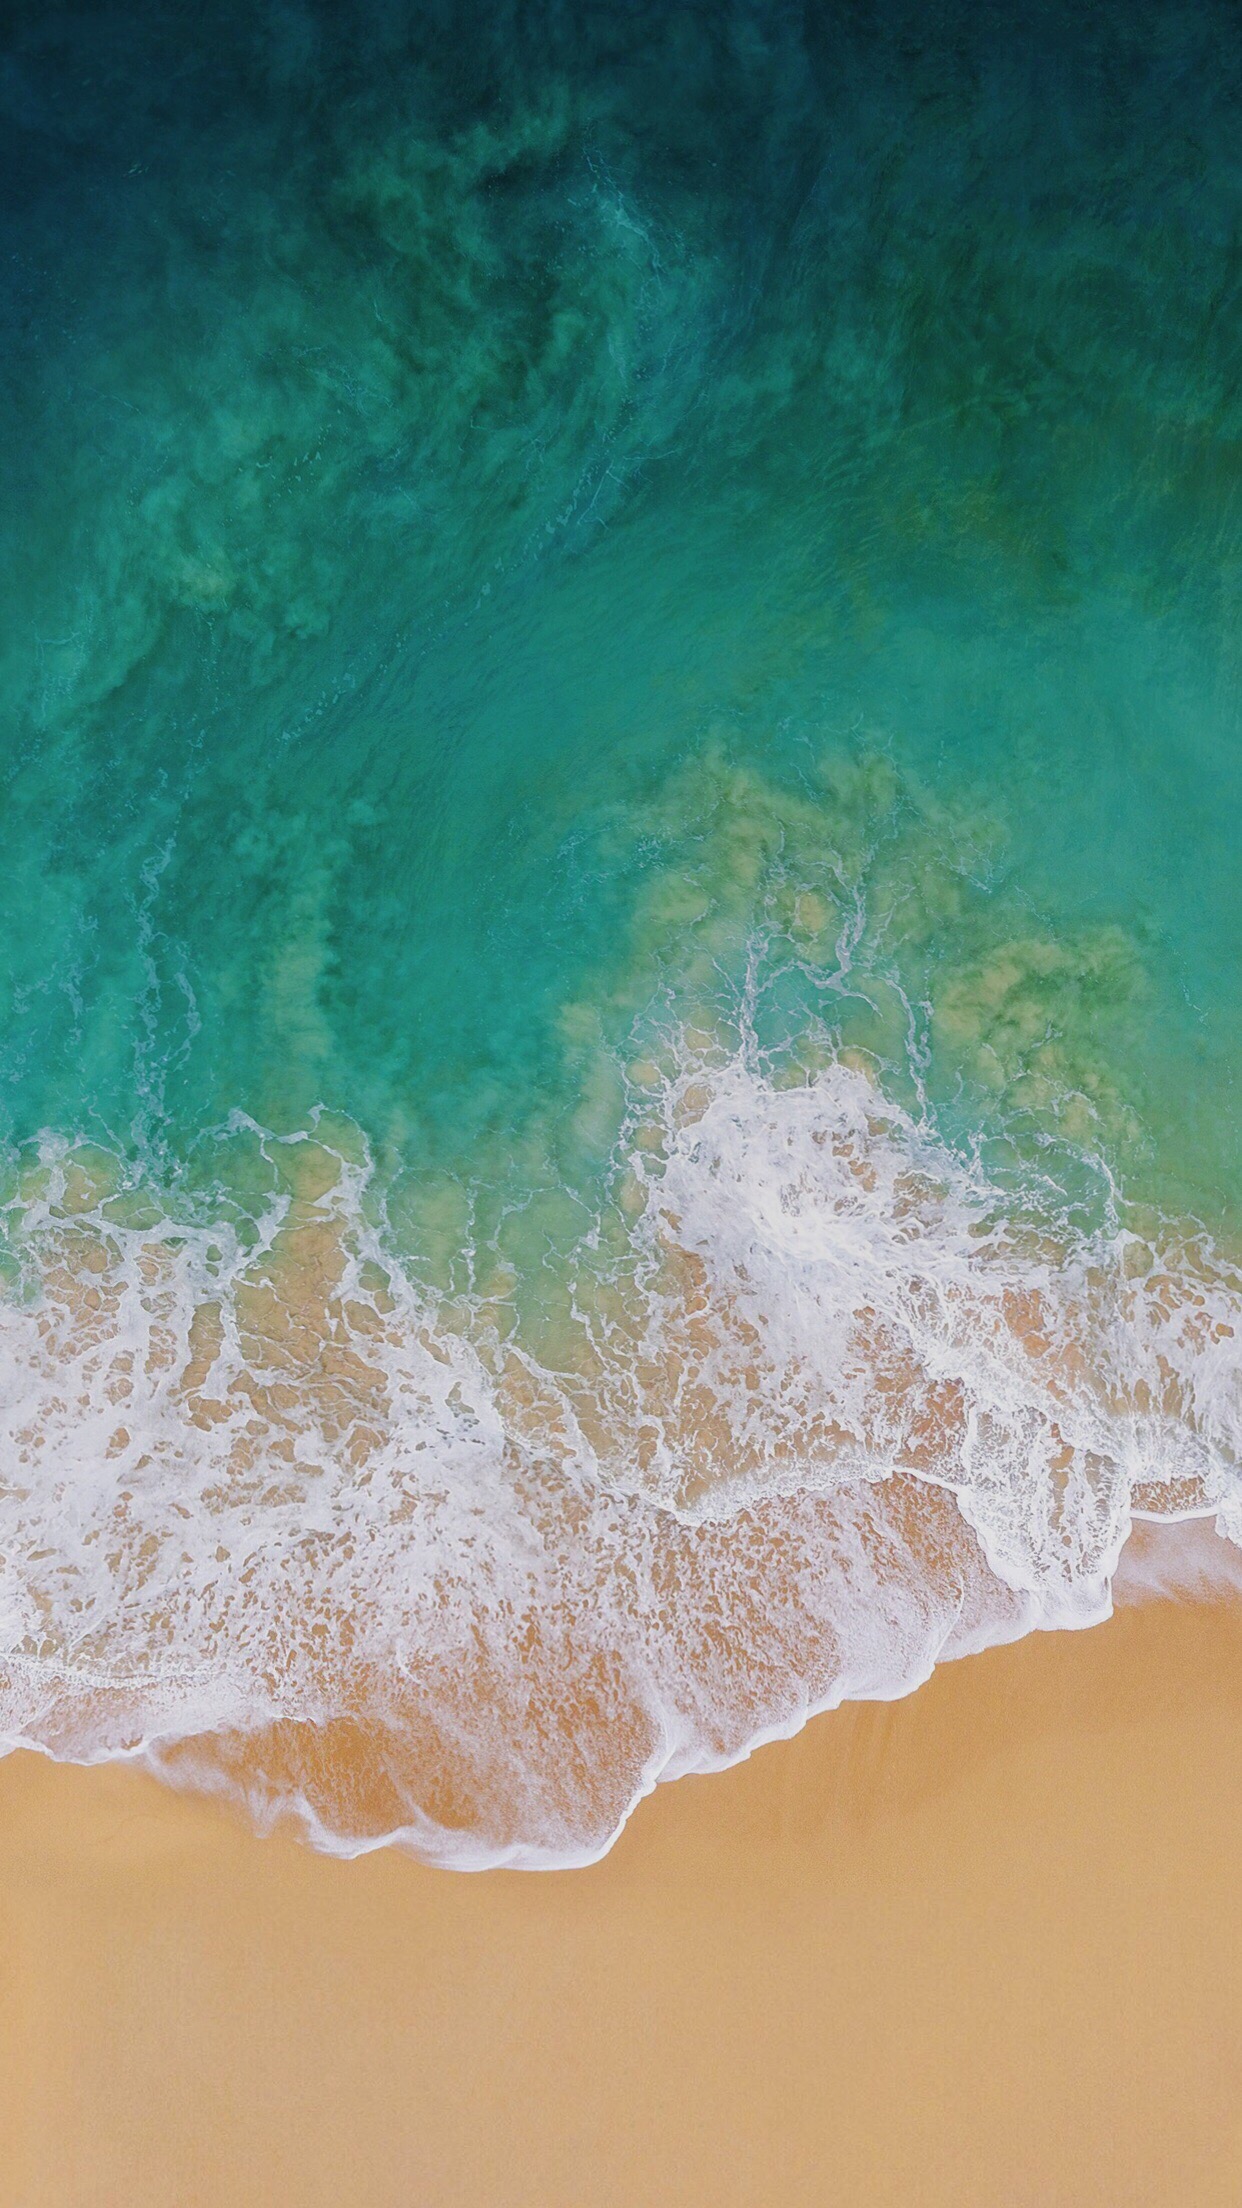 IOS 11 Official Android wallpaper